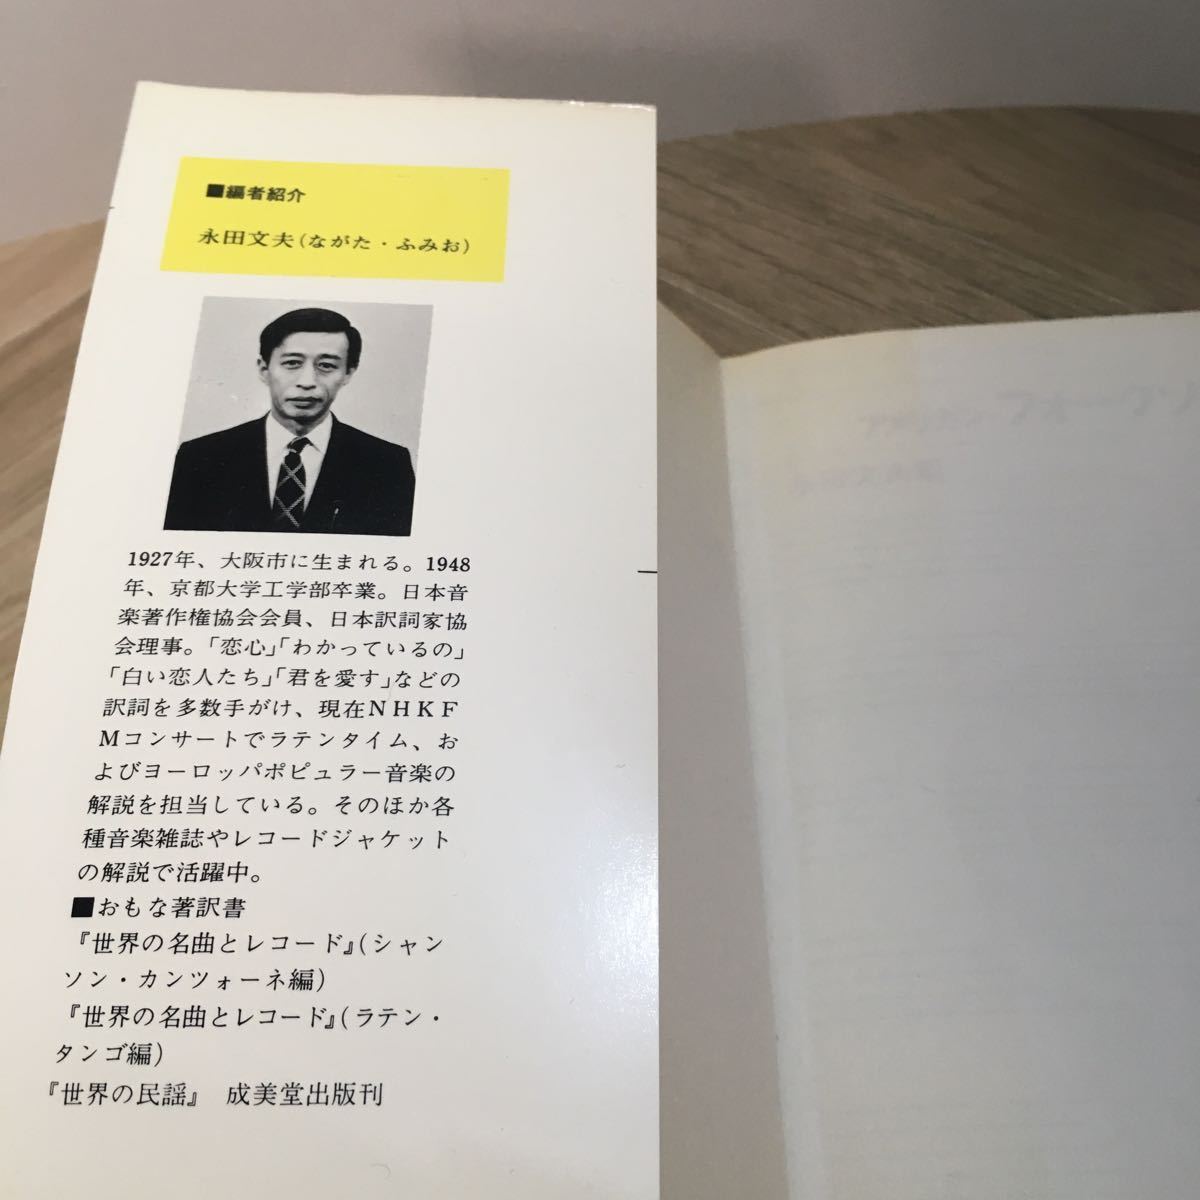 105a●SEIBIDO SONG BOOKS フォークソング／アメリカン・フォークソング 永田文夫編 2冊セット 成美堂出版　楽譜 歌詞本_画像6